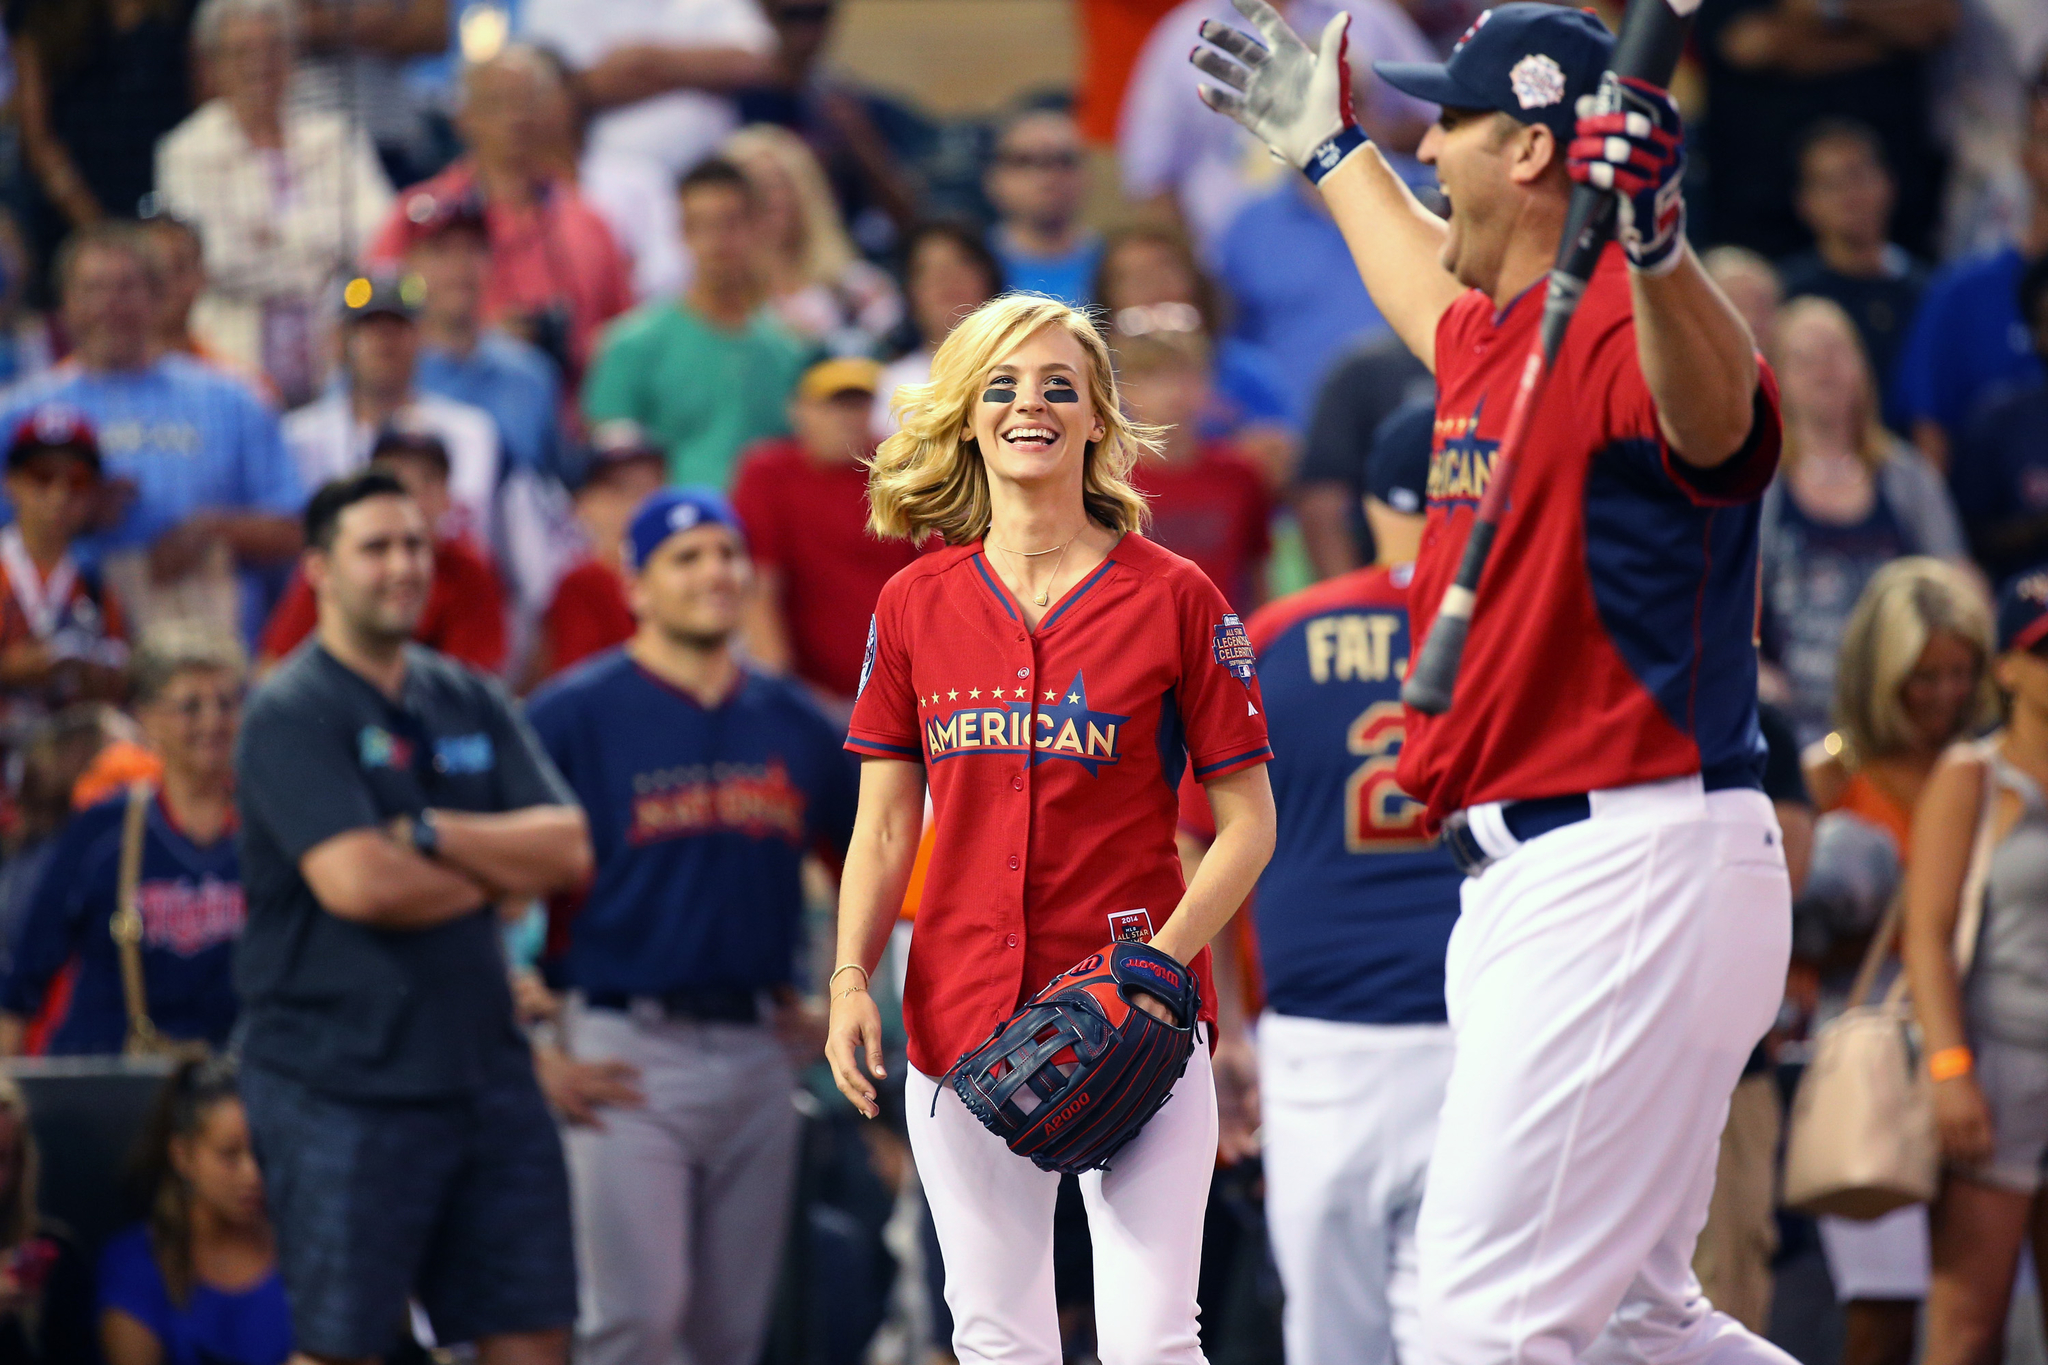 January Jones celebrates at the 2014 MLB All-Star legends and celebrity softball game on July 13, 2014 at the Target Field in Minneapolis, Minnesota.